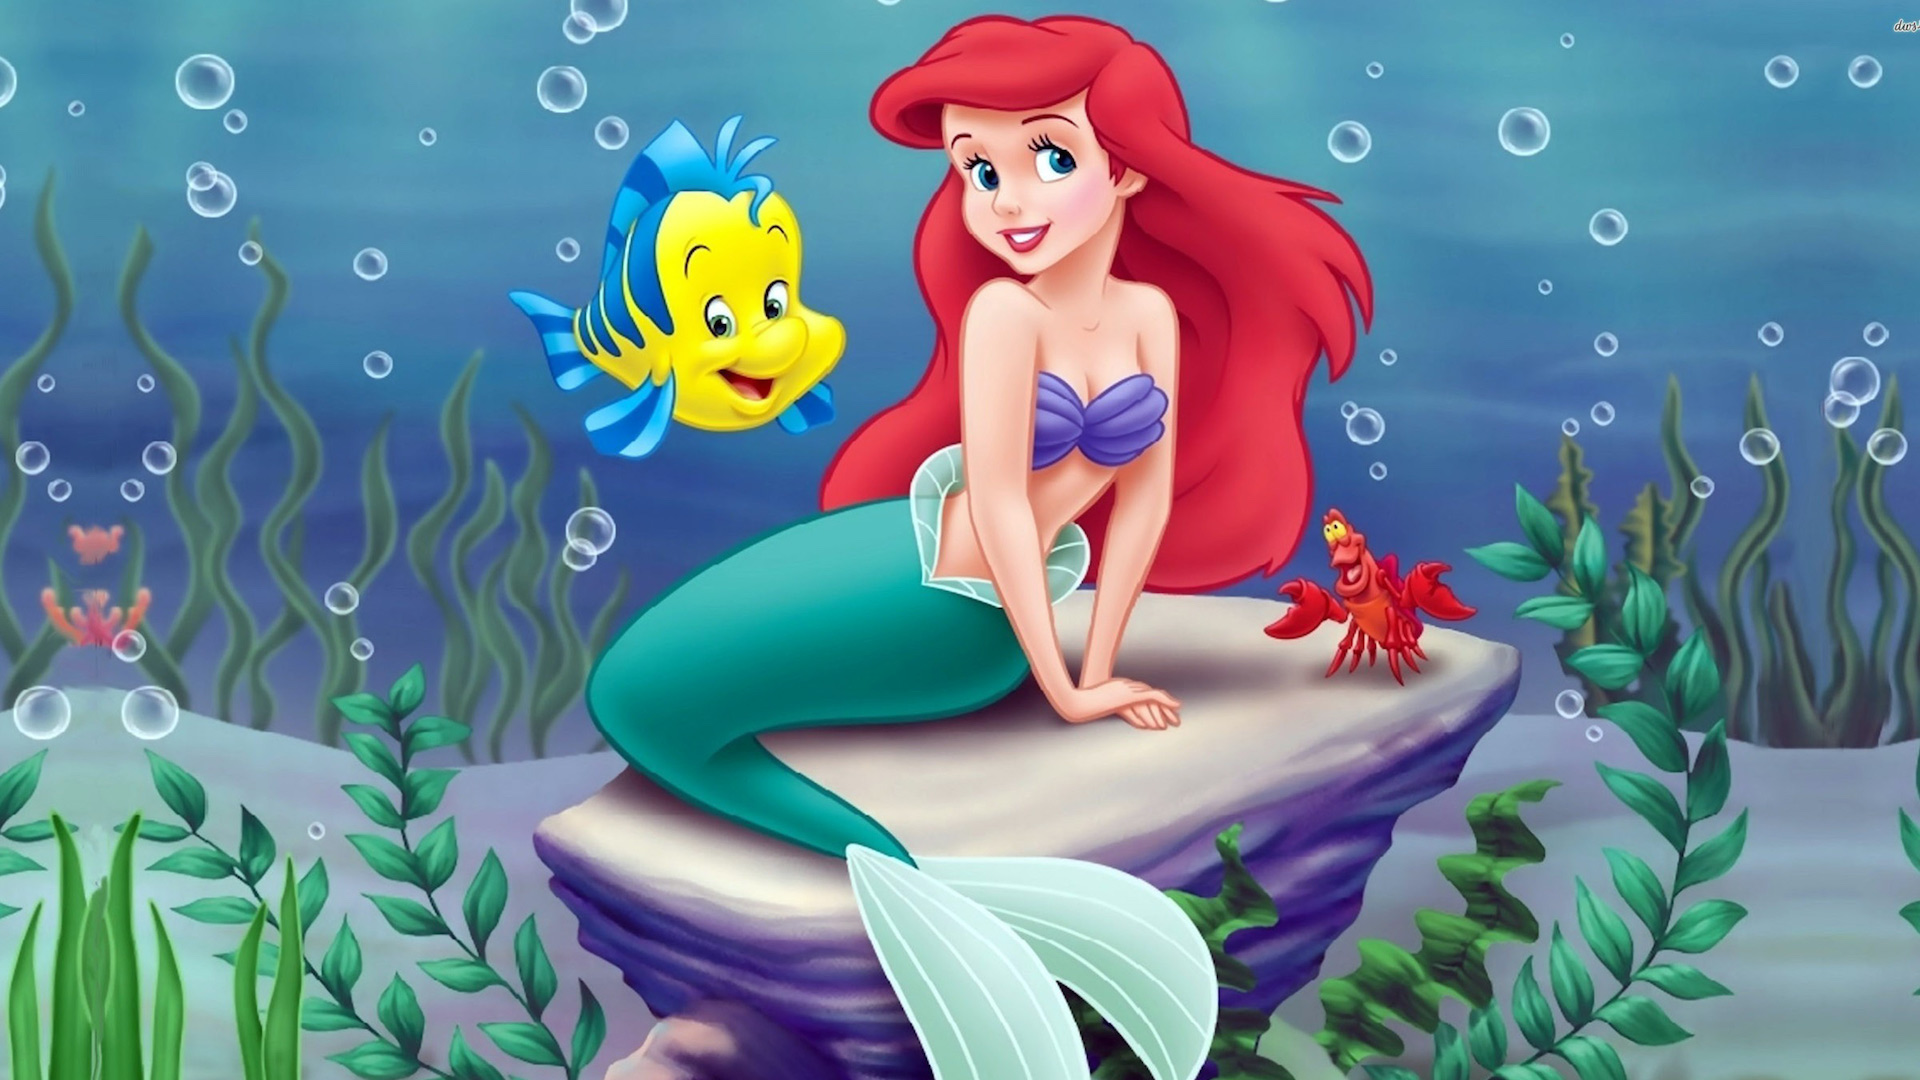 A scene from The Little Mermaid